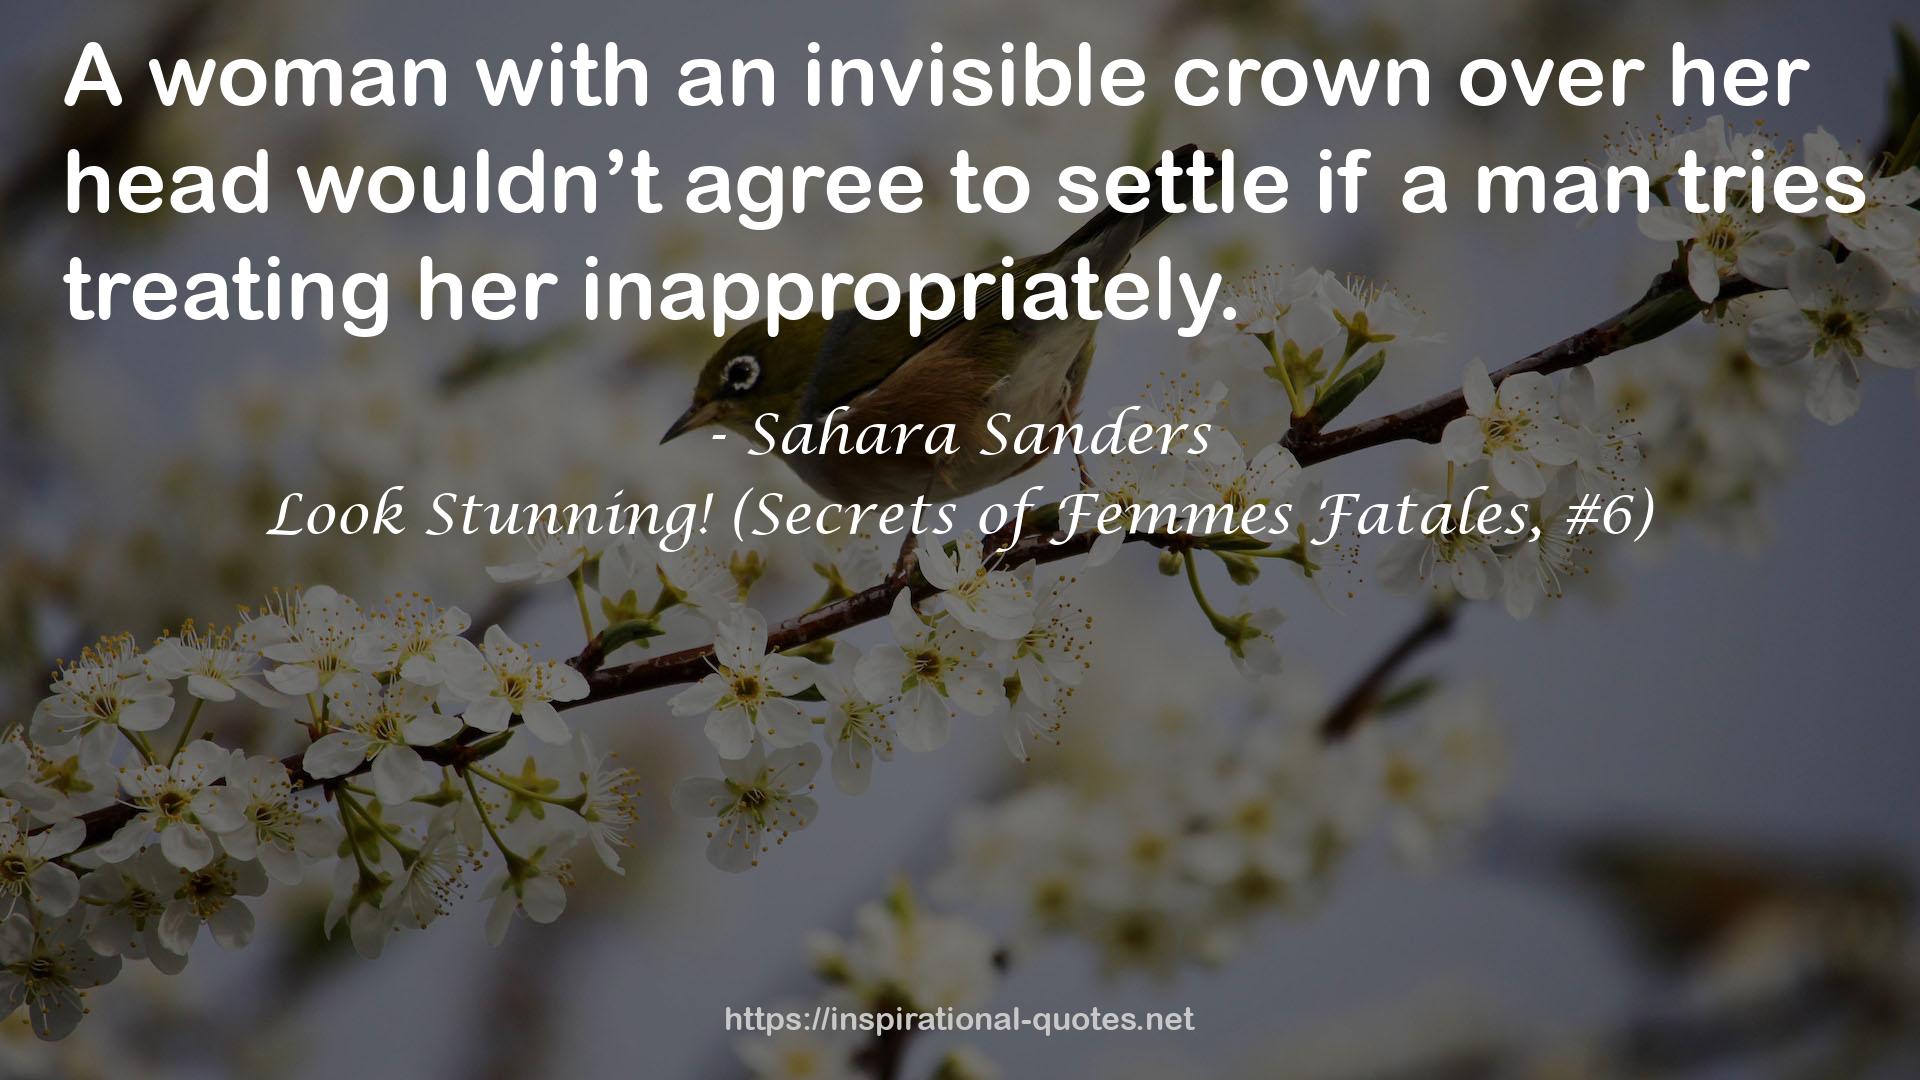 Look Stunning! (Secrets of Femmes Fatales, #6) QUOTES